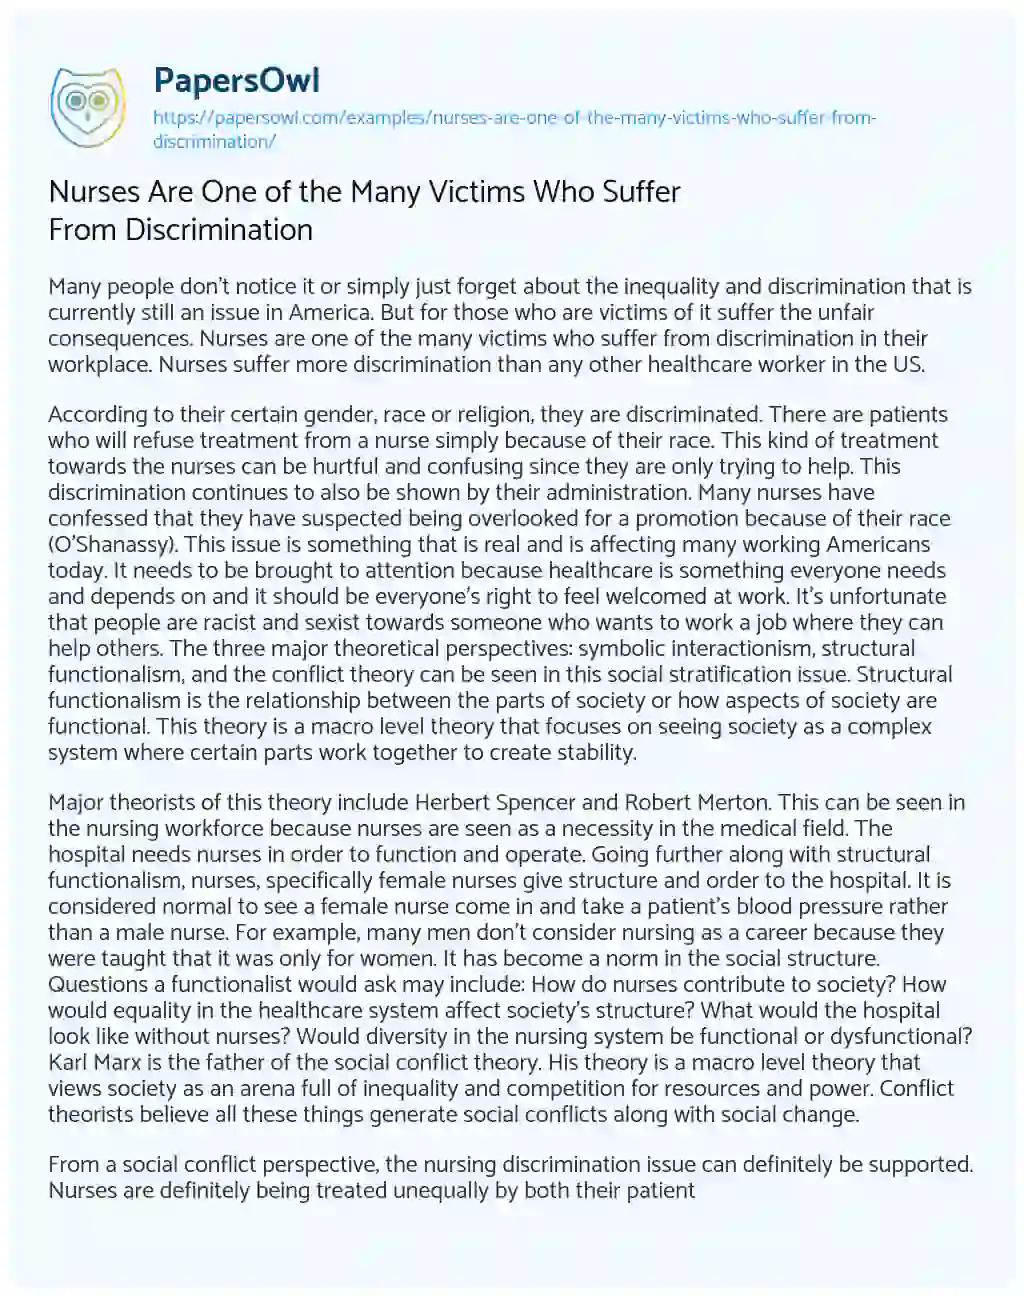 Essay on Nurses are One of the Many Victims who Suffer from Discrimination